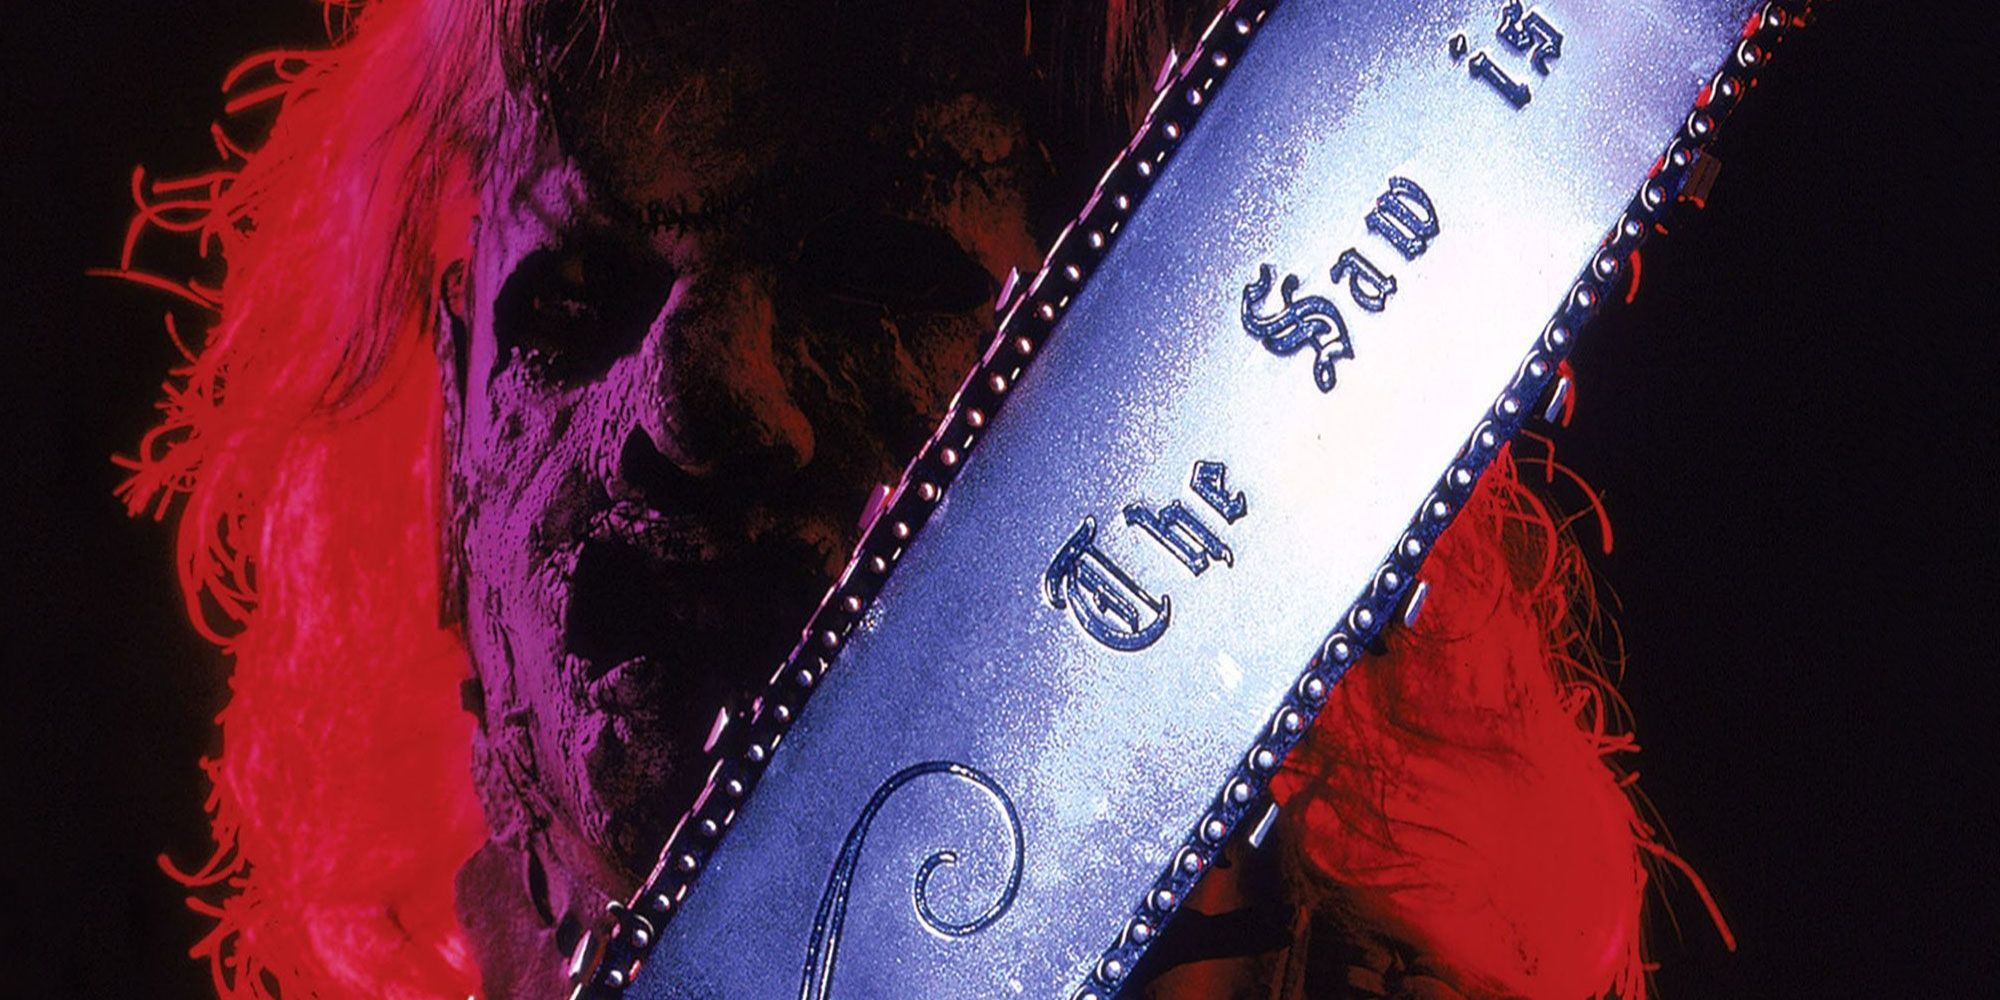 Closeup of Leatherface from Leatherface: The Texas Chainsaw Massacre III